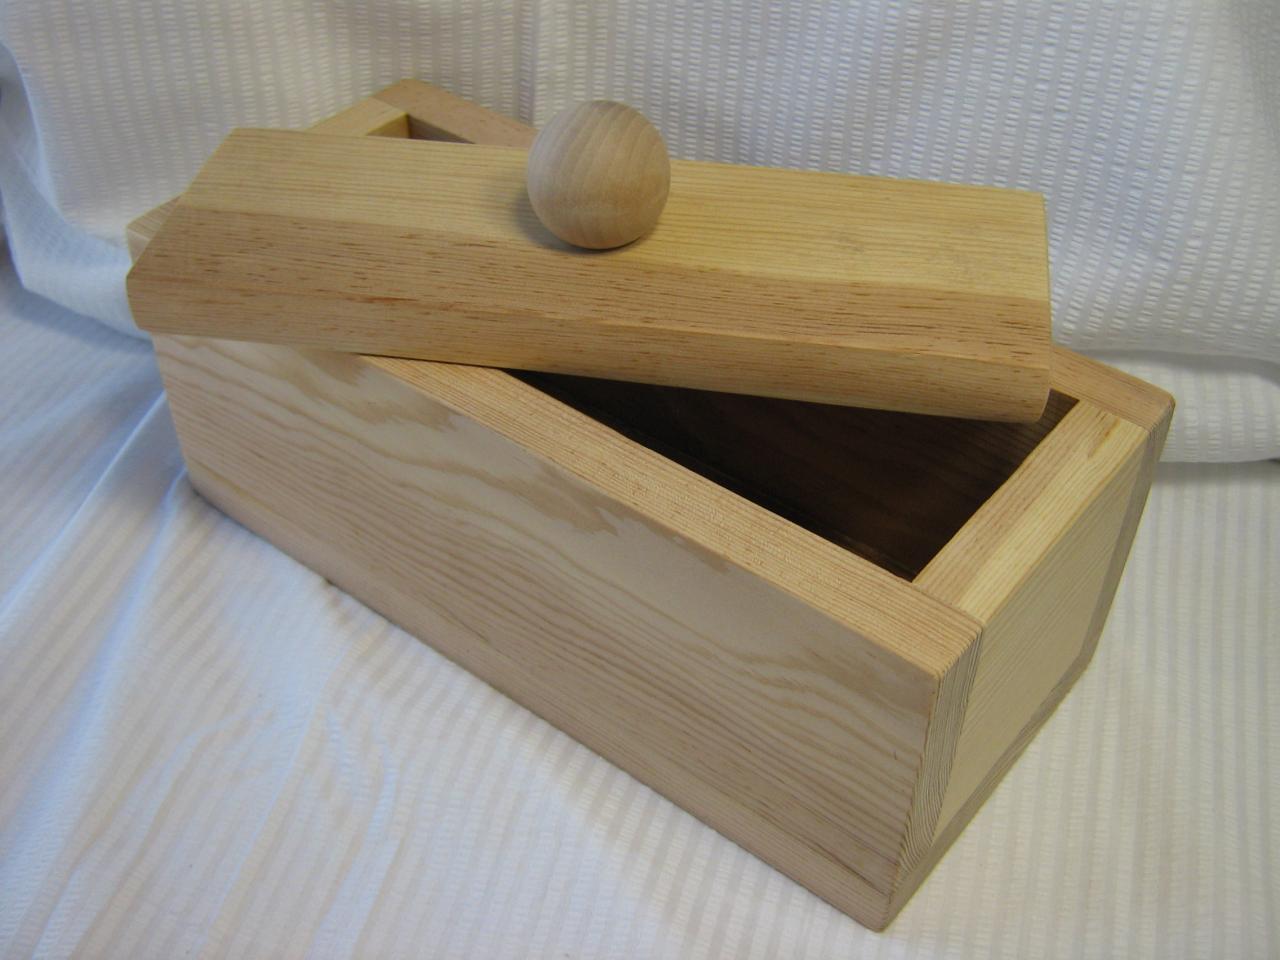 3 Pound Wood Soap Mold With Lid - Handmade In Colorado